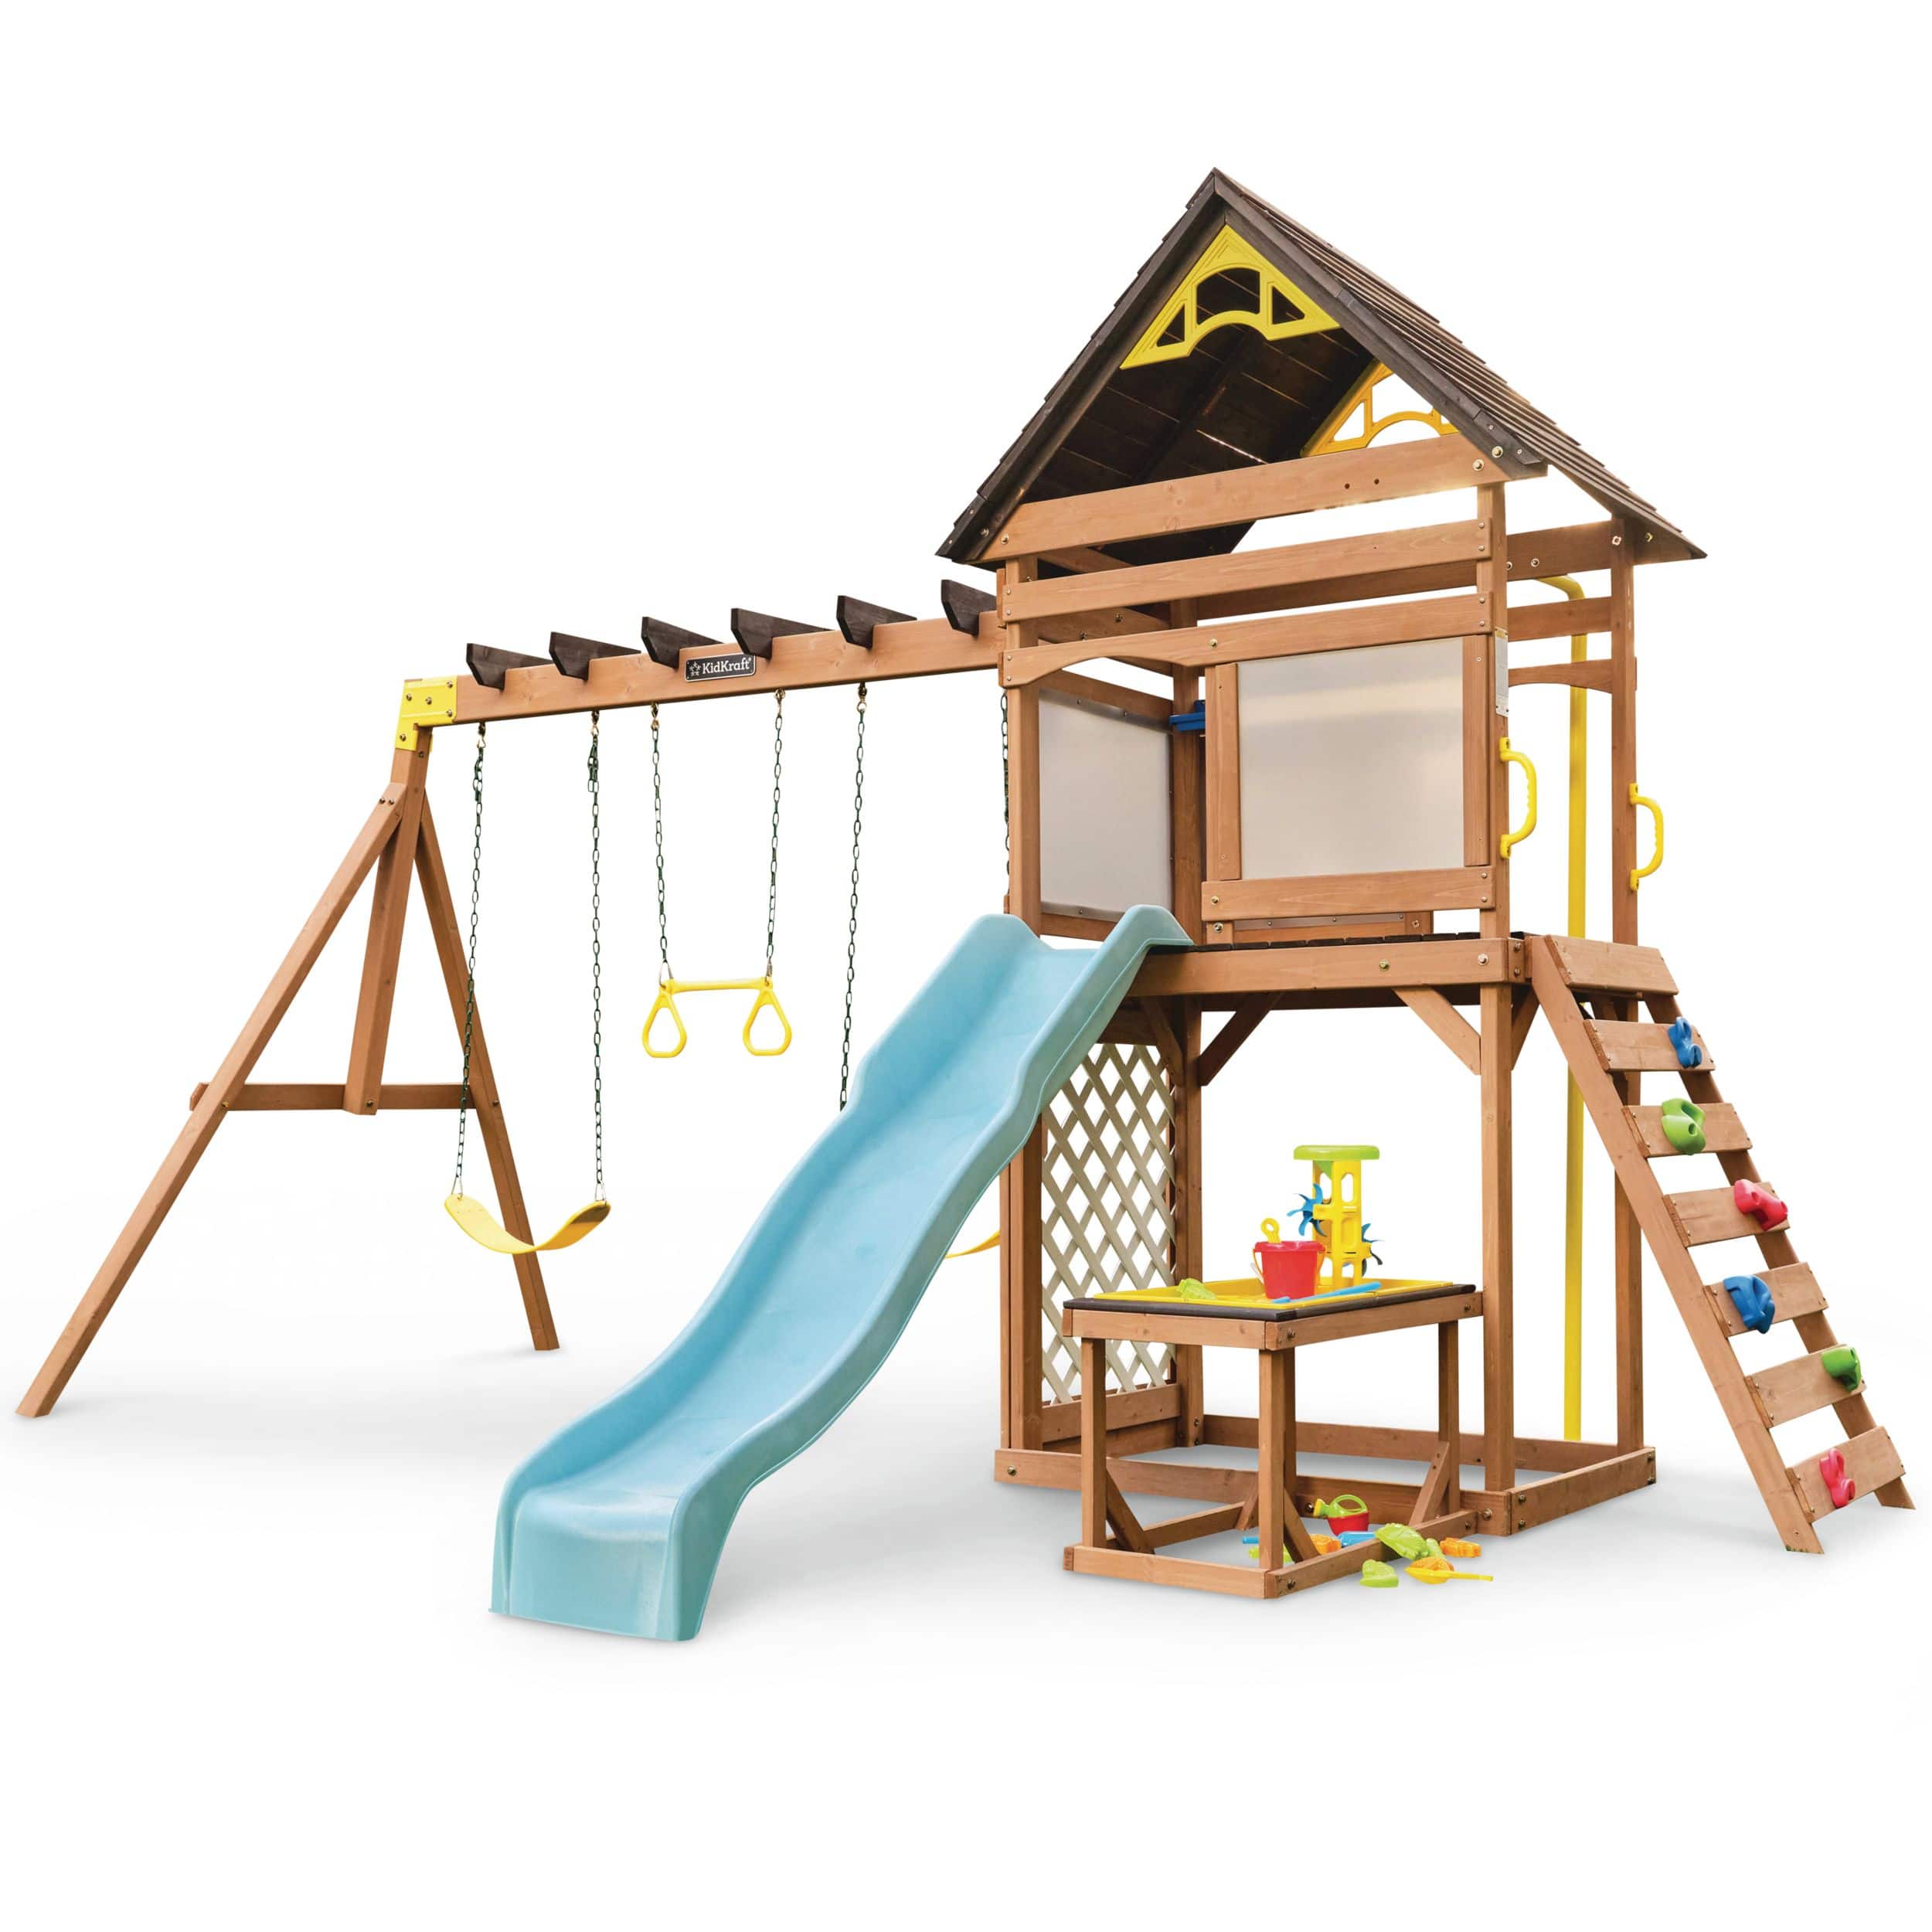 Sturdy Rope Climbing Ladder Wooden Playhouse Ladder Toy w/ Hook